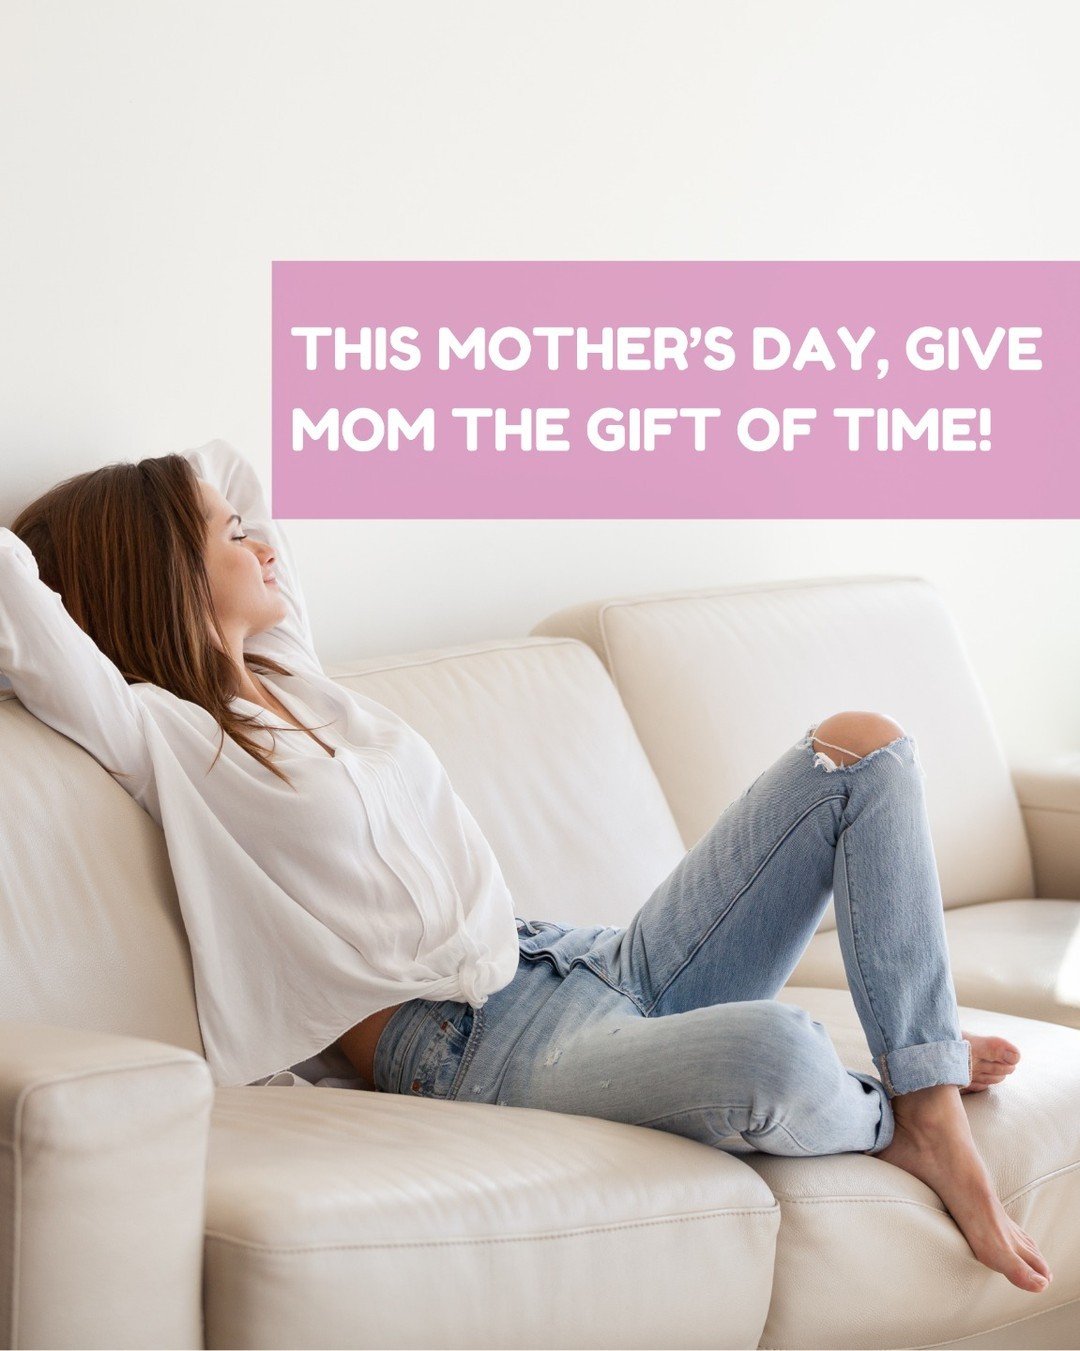 Moms deserve a break! This Mother's Day, show your appreciation with a sparkling clean home from U HAVE IT MAID. Book a cleaning service and give Mom the gift of free time to relax and recharge. Use code MOMSDAY15 for 15% off!